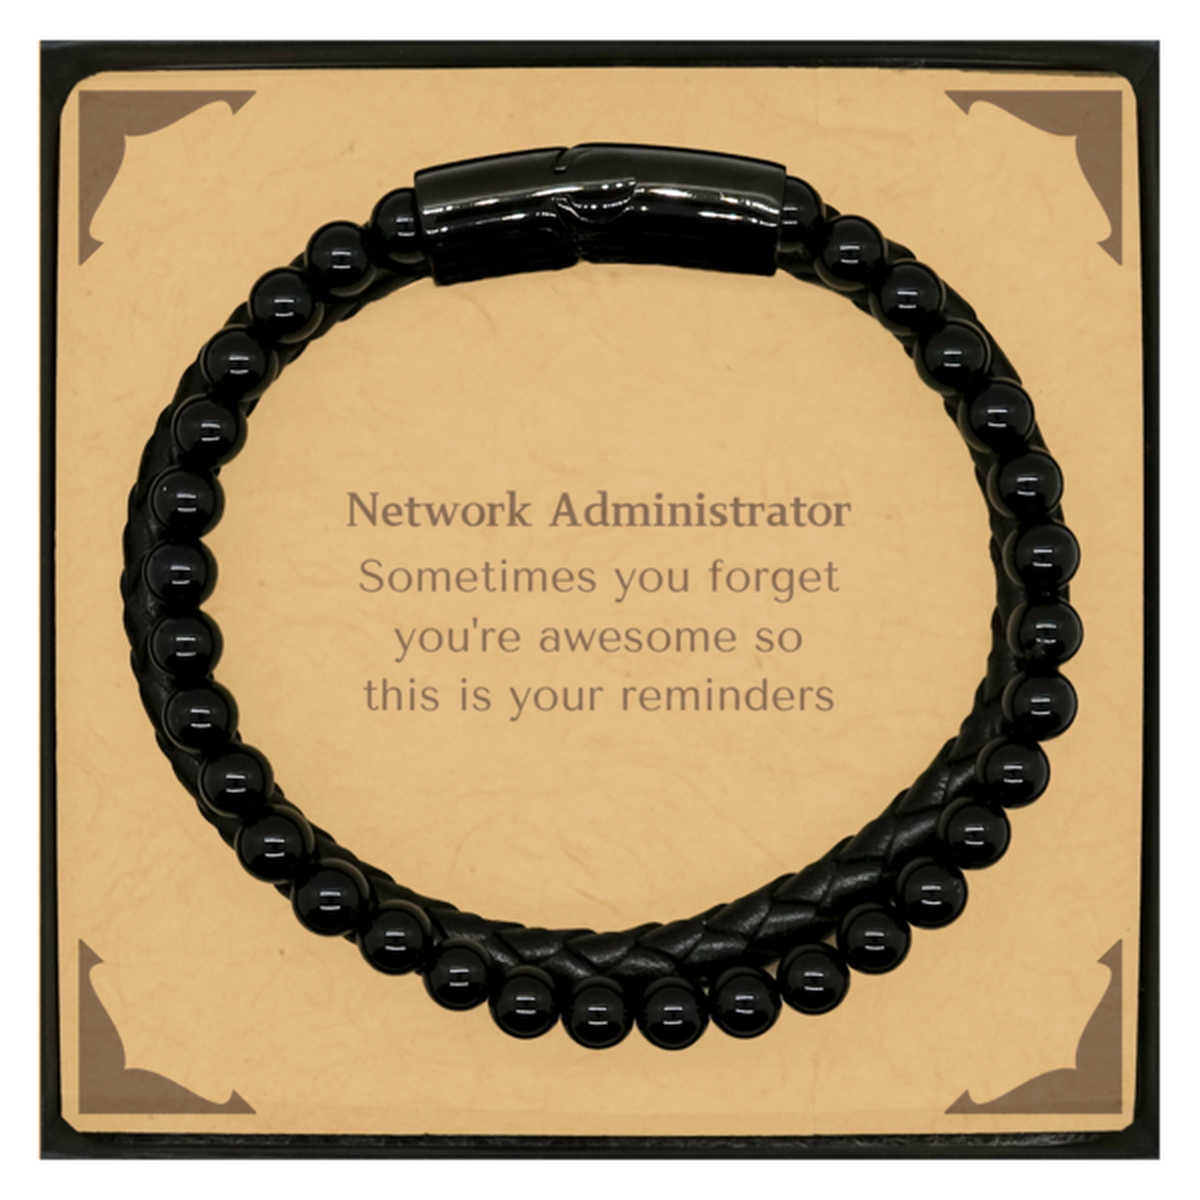 Sentimental Network Administrator Stone Leather Bracelets, Network Administrator Sometimes you forget you're awesome so this is your reminders, Graduation Christmas Birthday Gifts for Network Administrator, Men, Women, Coworkers